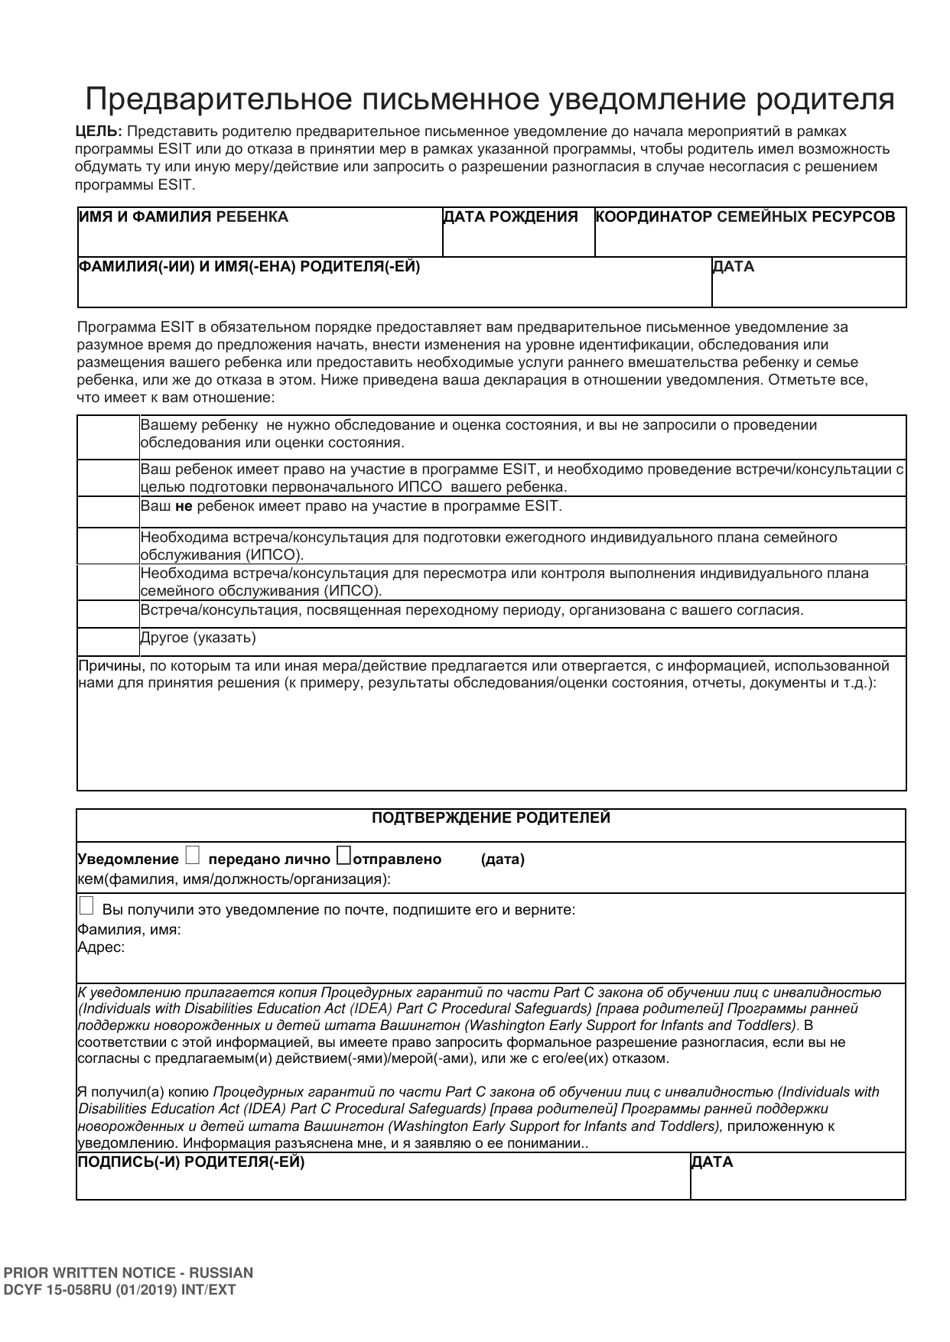 DCYF Form 15-058 Parent Prior Written Notice - Washington (Russian), Page 1